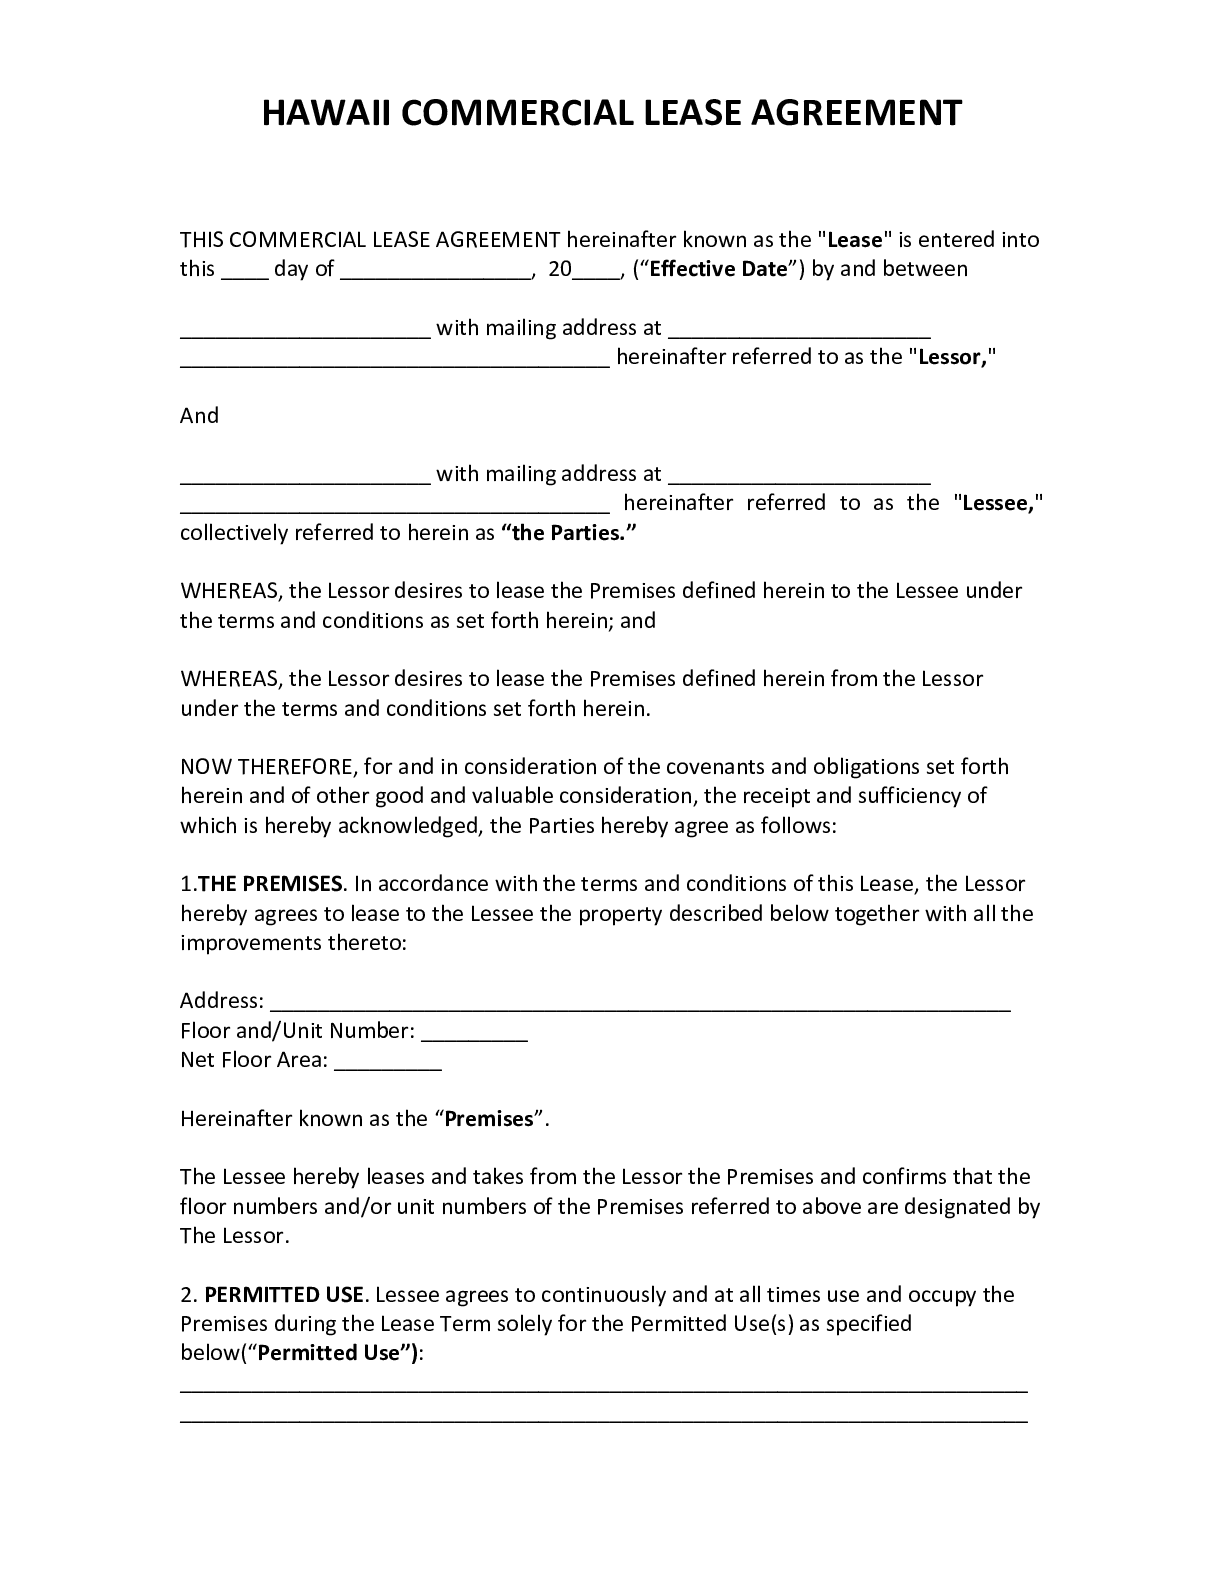 hawaii-lease-agreement-inventory-form-printable-form-templates-and